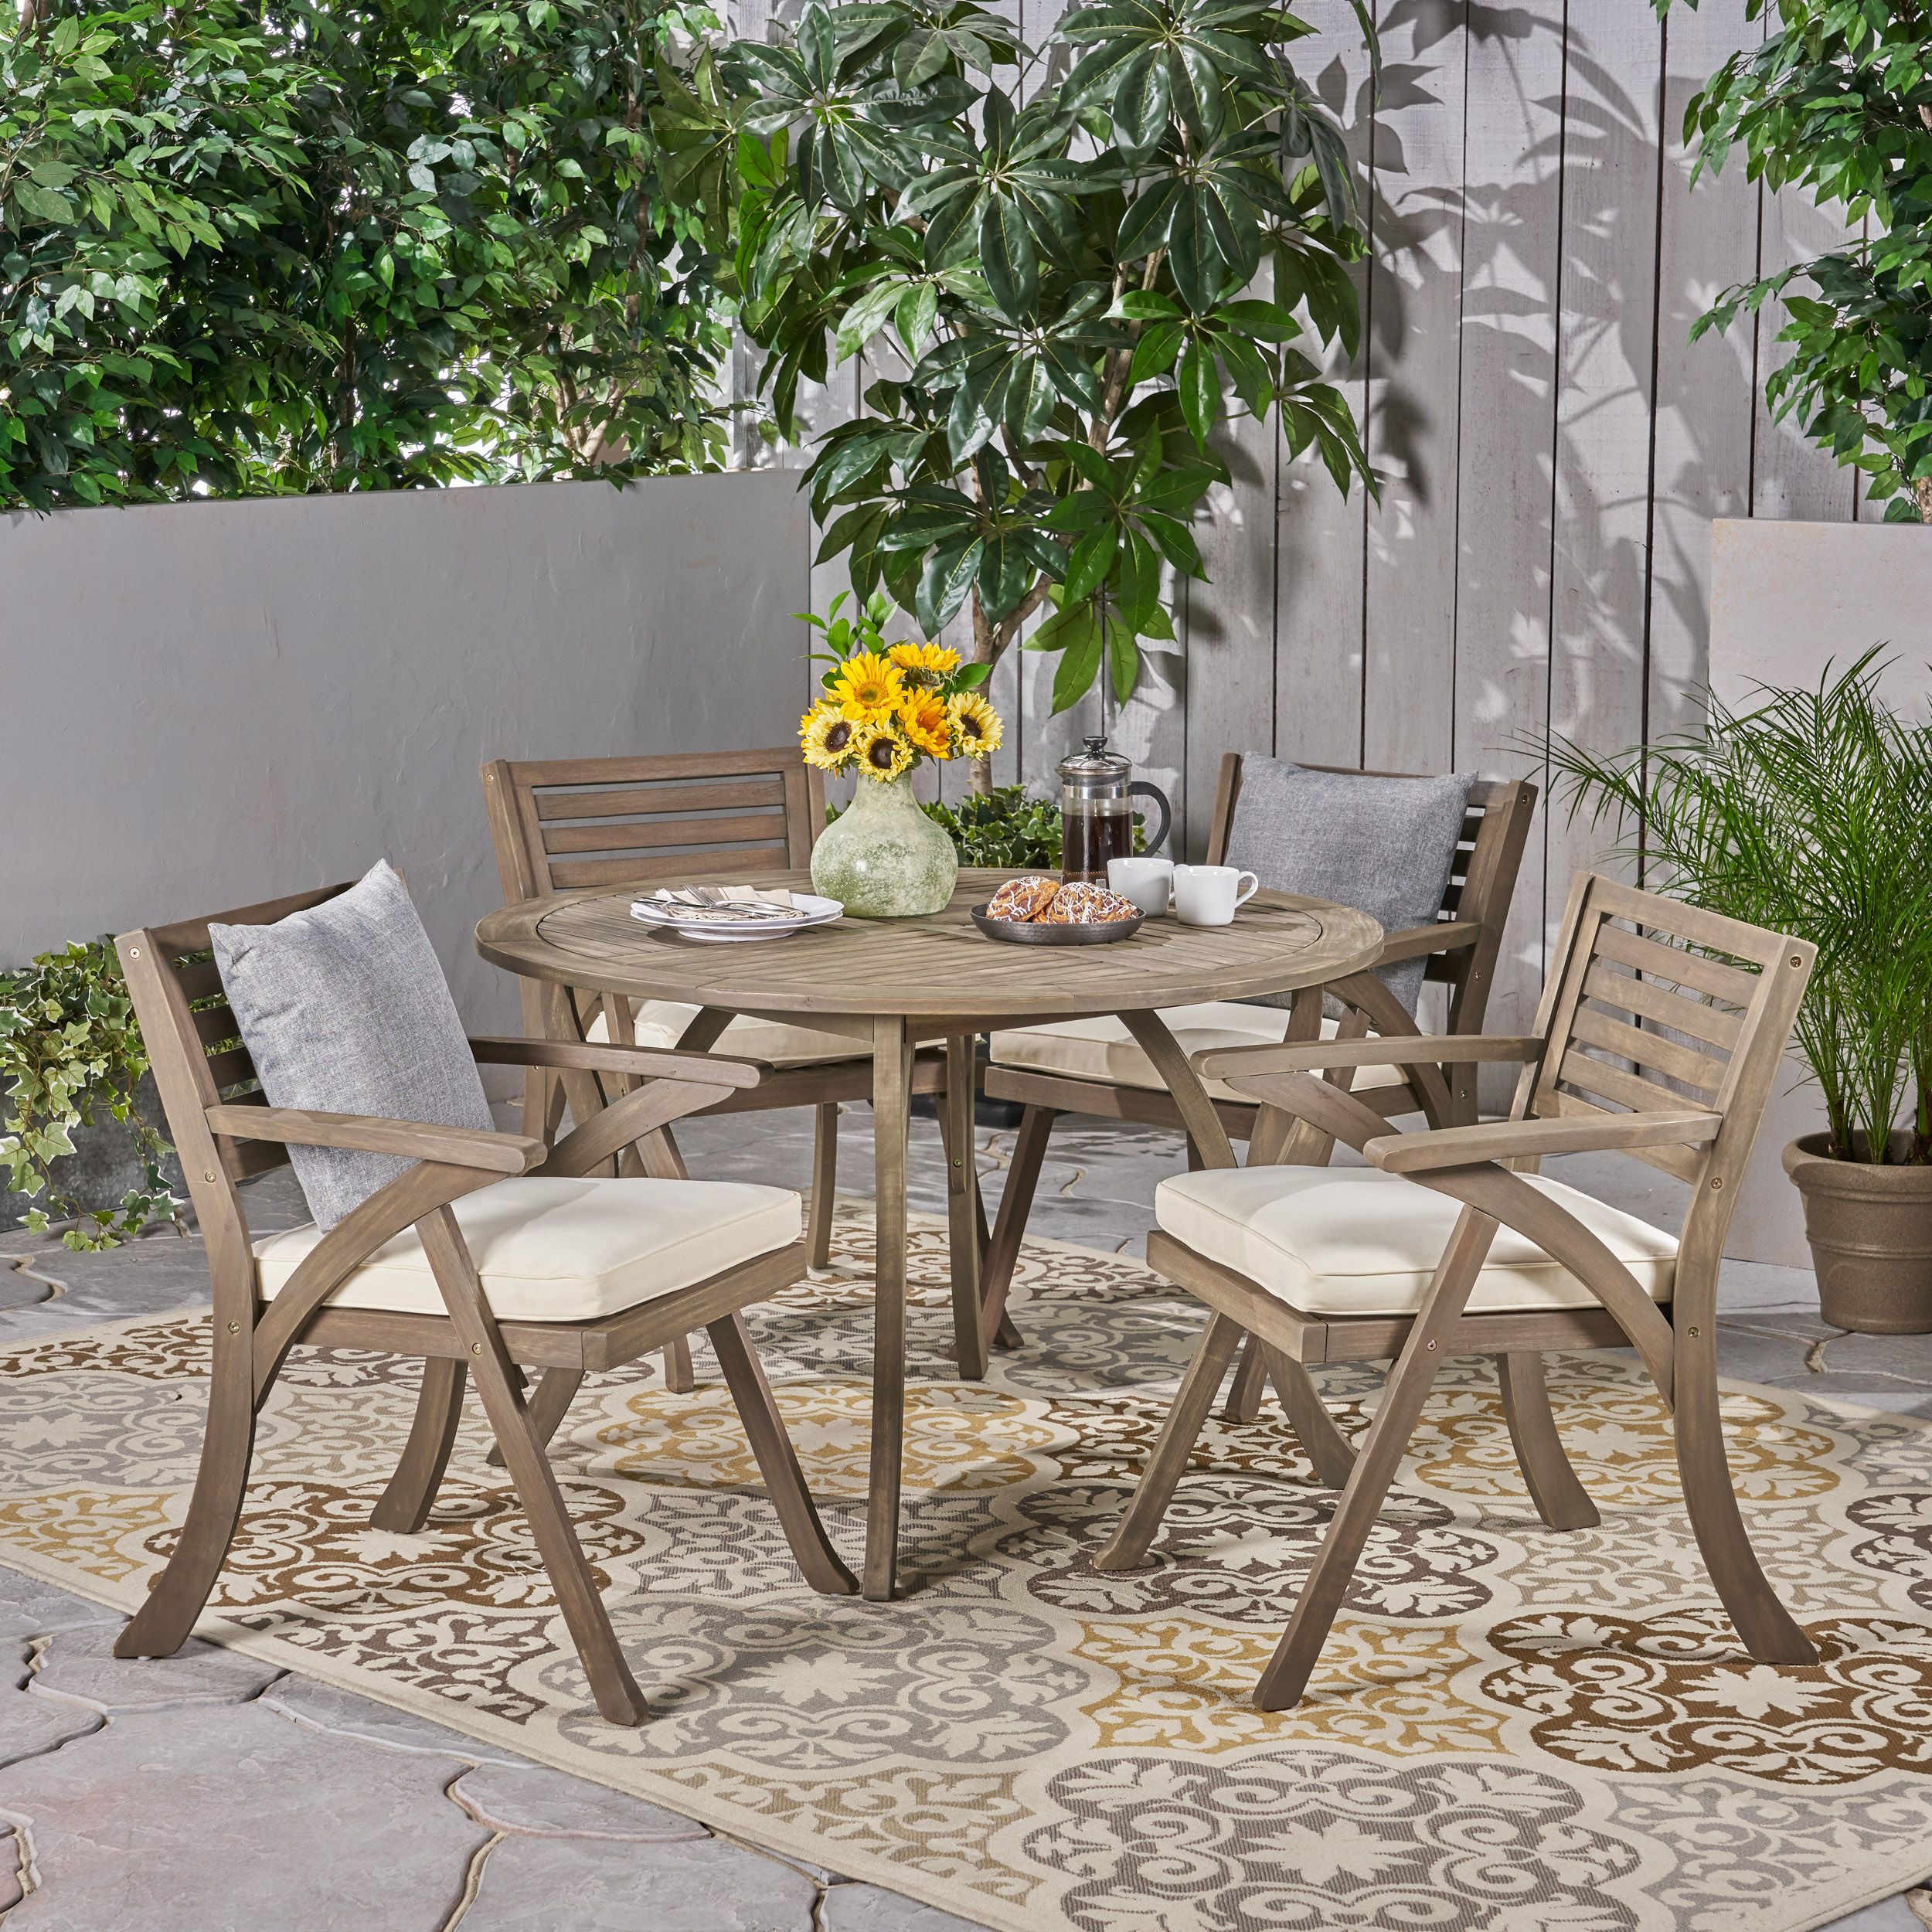 Jordy Outdoor 5 Piece Acacia Wood Dining Set With Round Table, Gray Throughout Round 5 Piece Outdoor Dining Set (View 1 of 15)